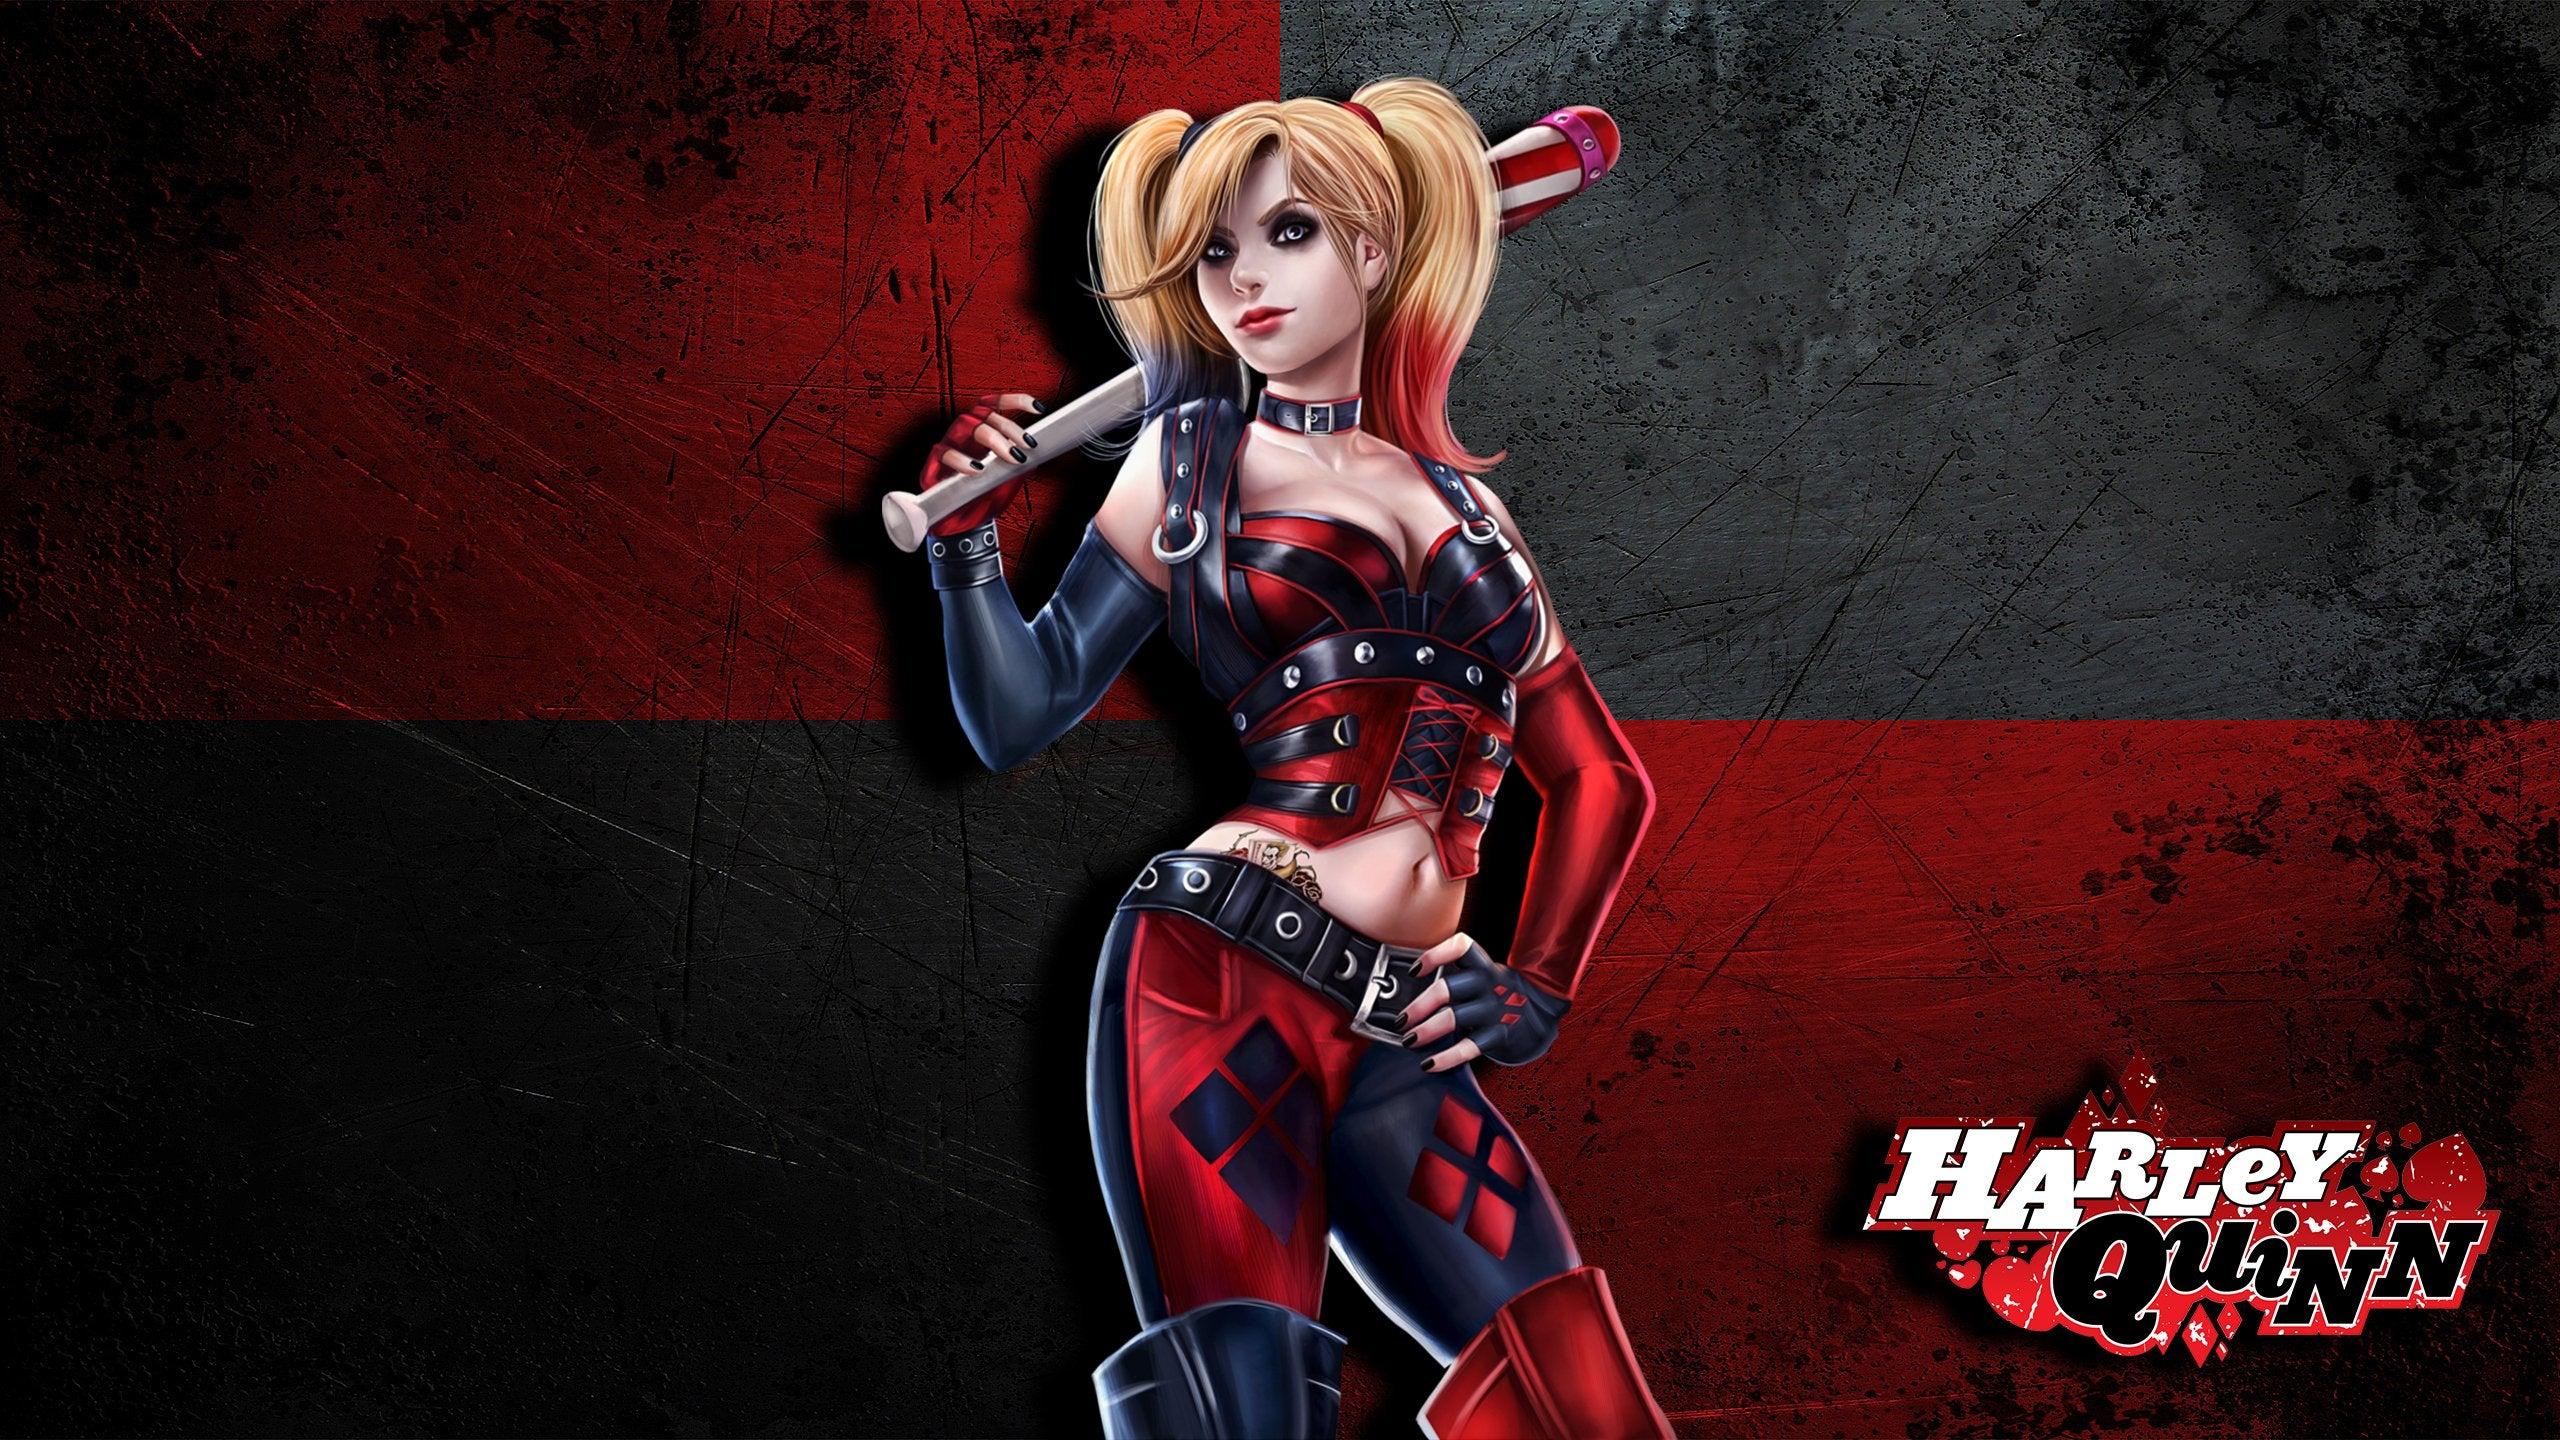 2560 x 1440 · jpeg - Harley Quinn wallpaper I made and thought I would share =] : HarleyQuinn